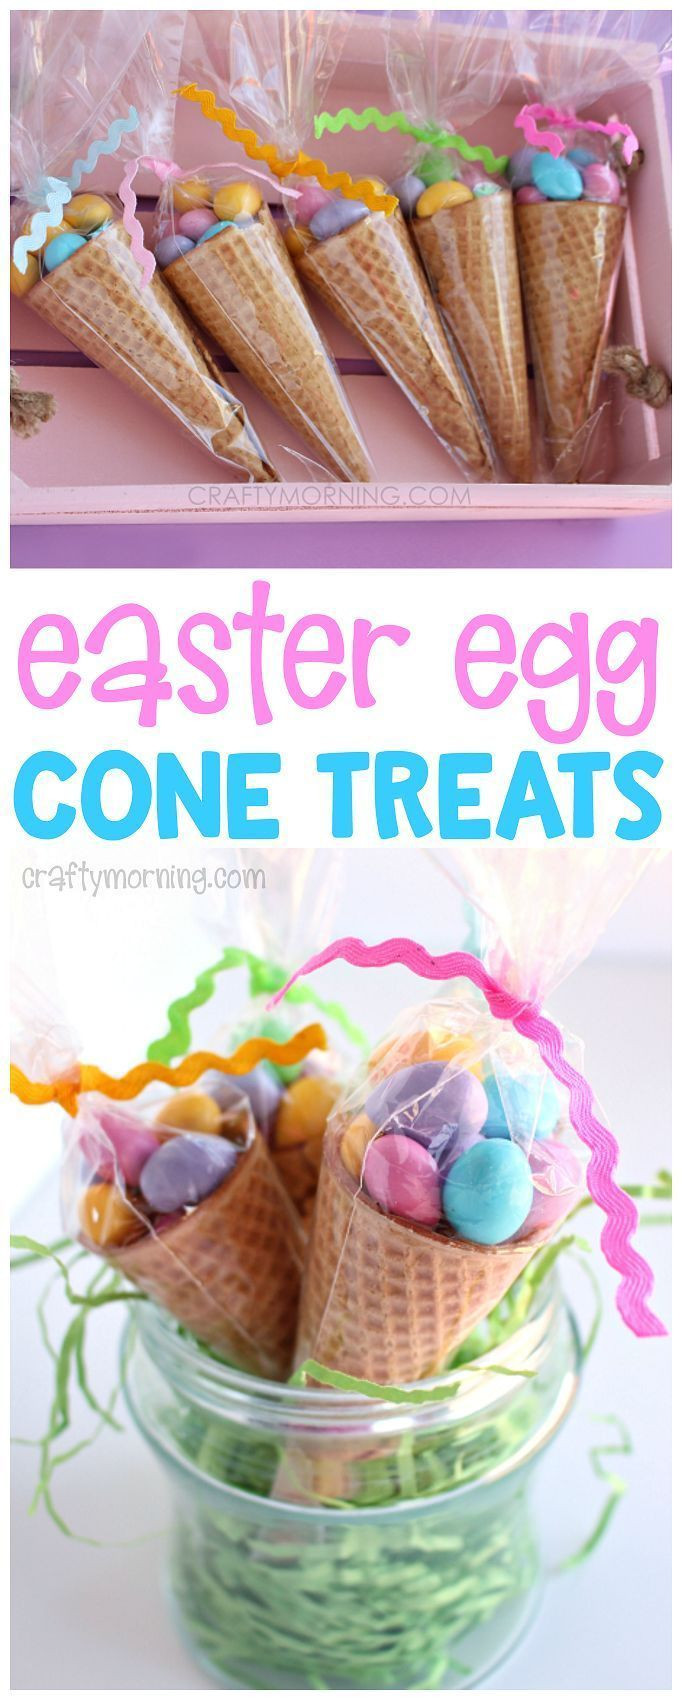 Classroom Easter Party Food Ideas
 √ 39 DIY Gift Basket Ideas With images